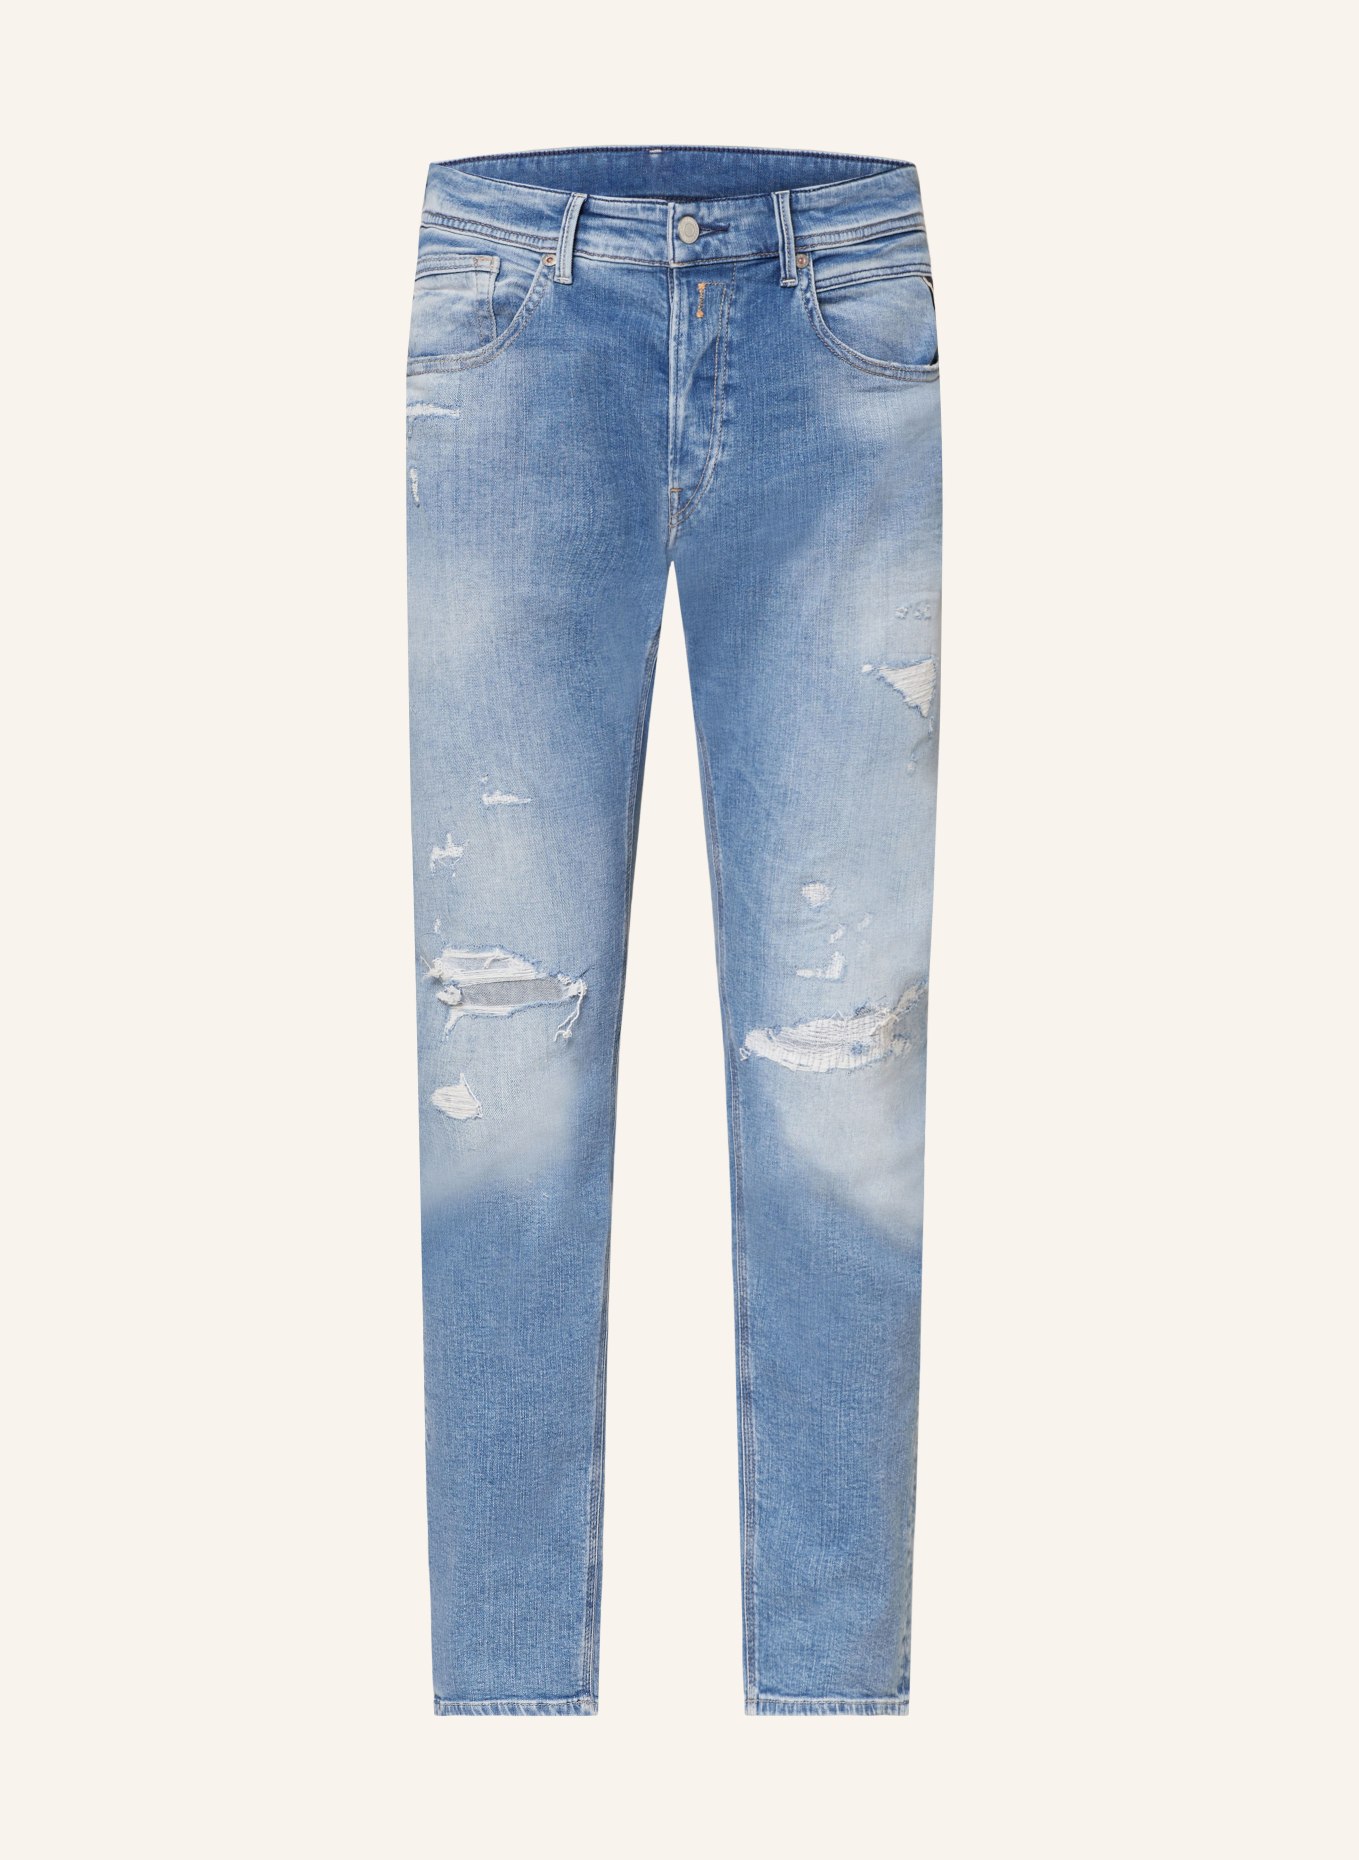 REPLAY Destroyed Jeans Extra Slim Fit, Farbe: 010 LIGHT BLUE (Bild 1)